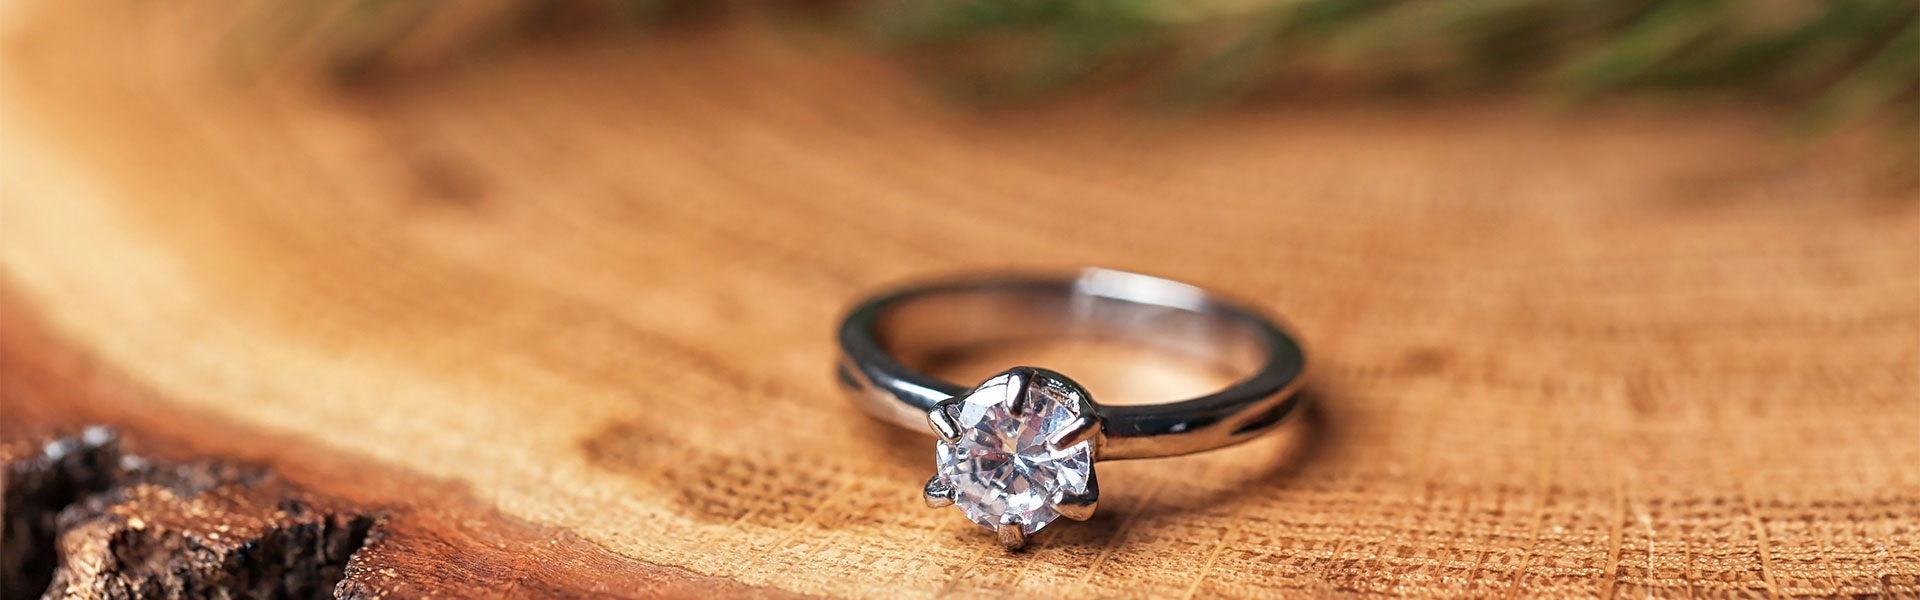 Conflict Free Diamonds - Ethical Sourcing